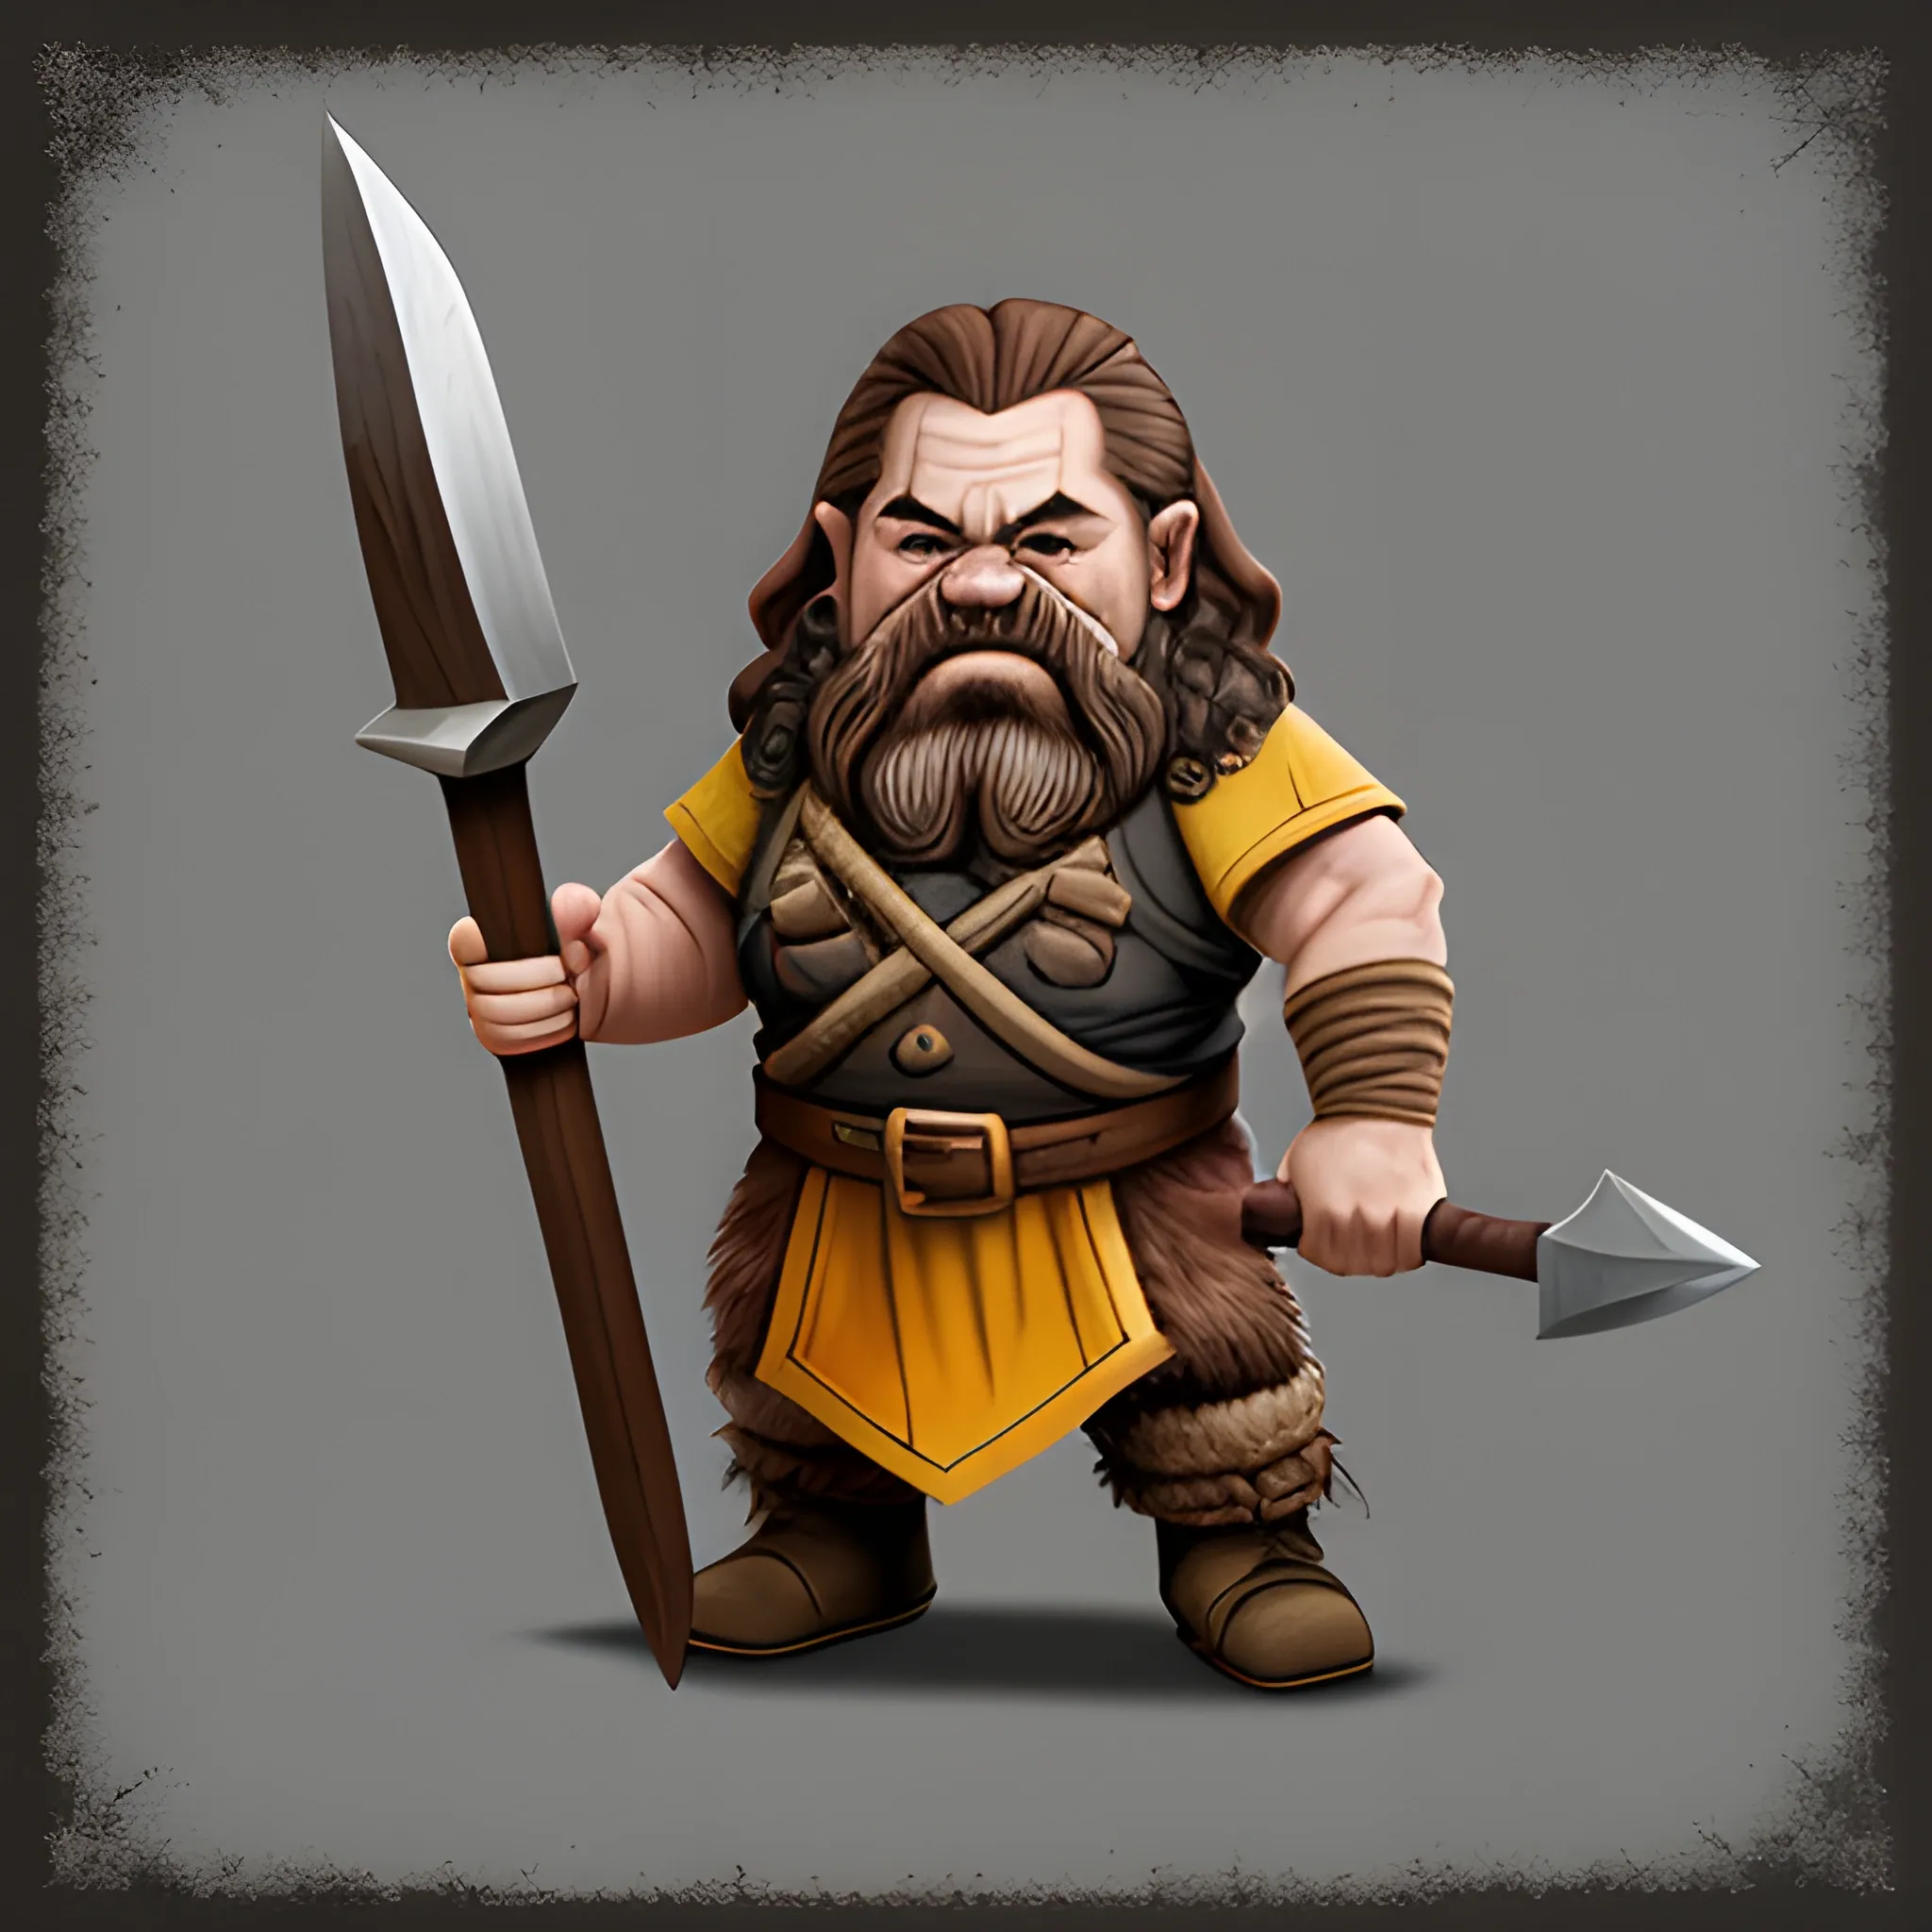 Dwarf, logo, holding axe and pickaxe, ready to fight, warcry